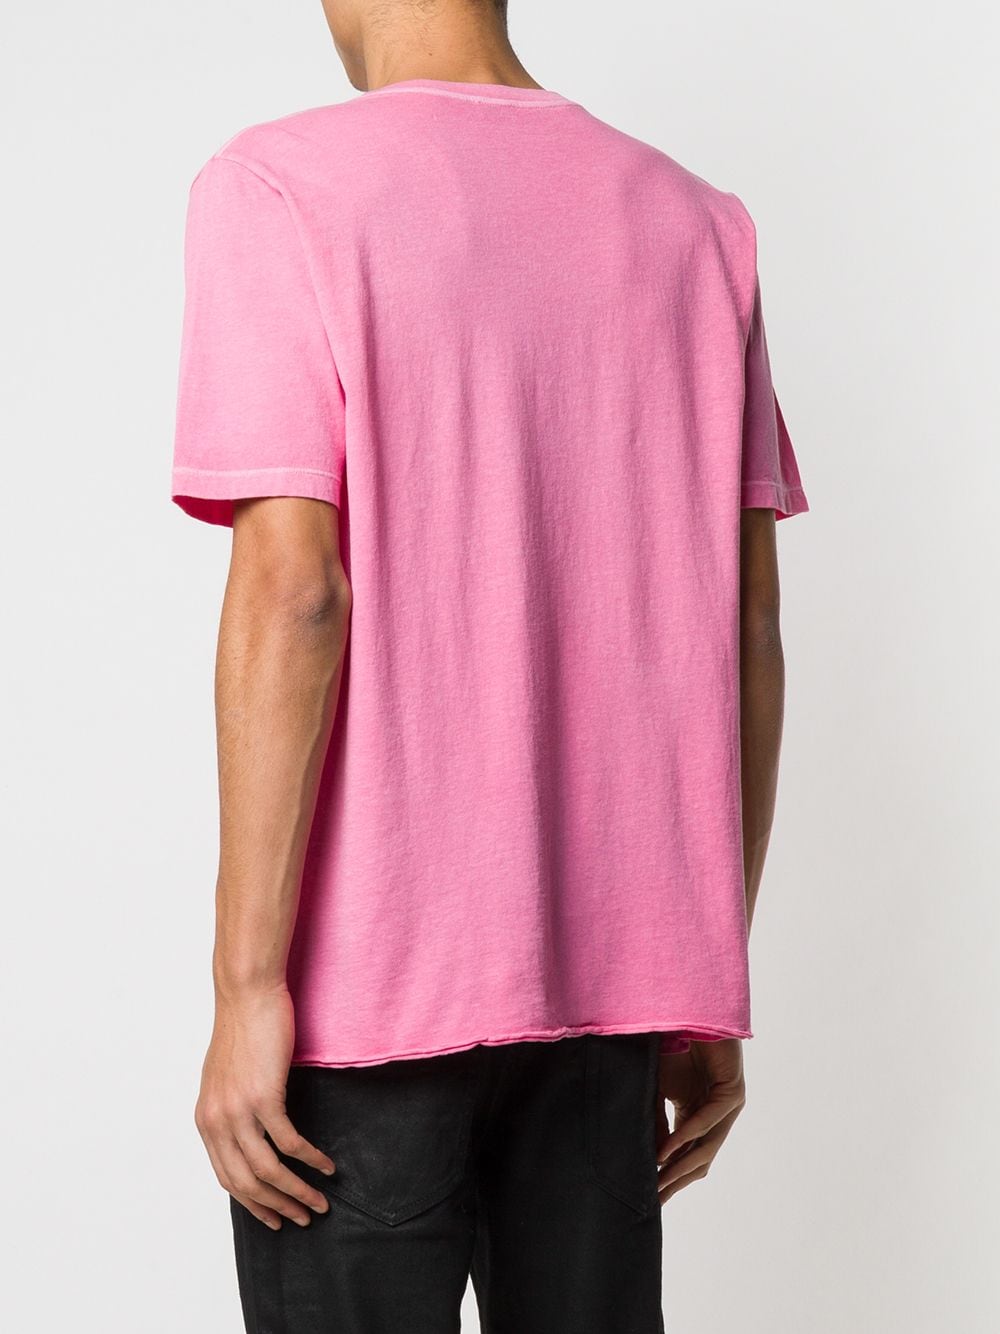 Shop pink Saint Laurent logo T-shirt with Express Delivery - Farfetch